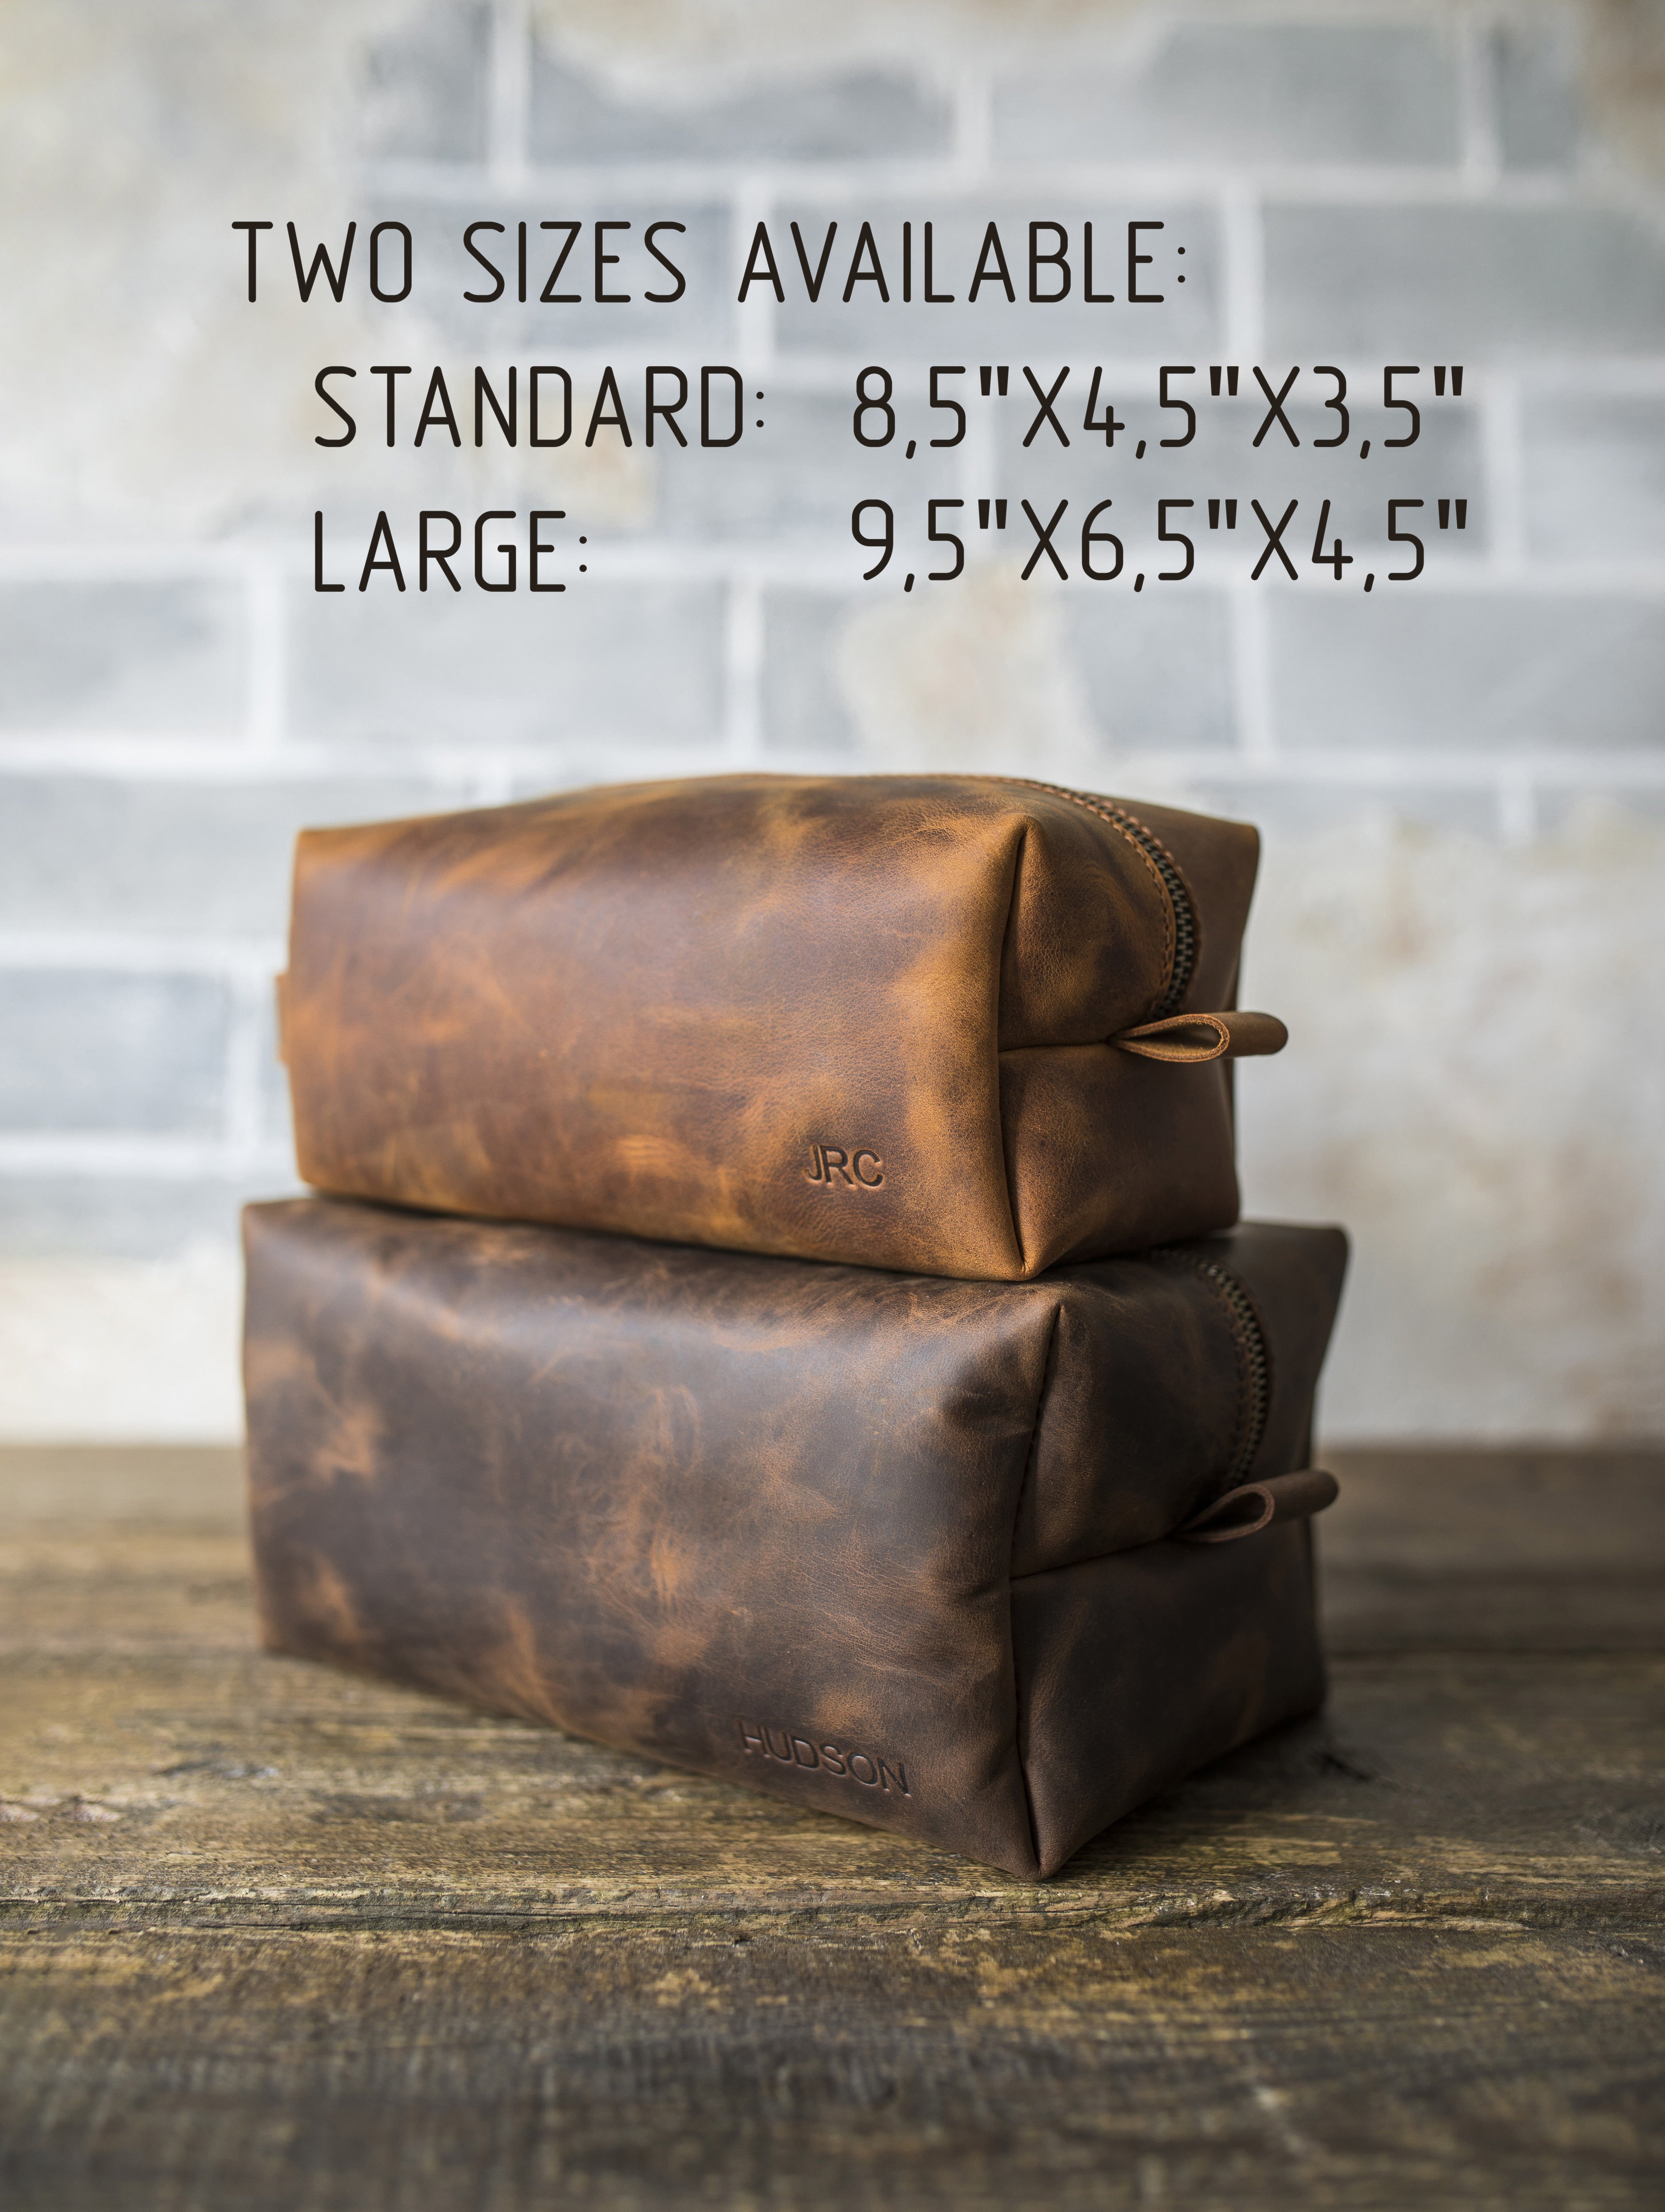 Distressed Italian Leather Personalized Dopp Kit - Toiletry Bag for Men